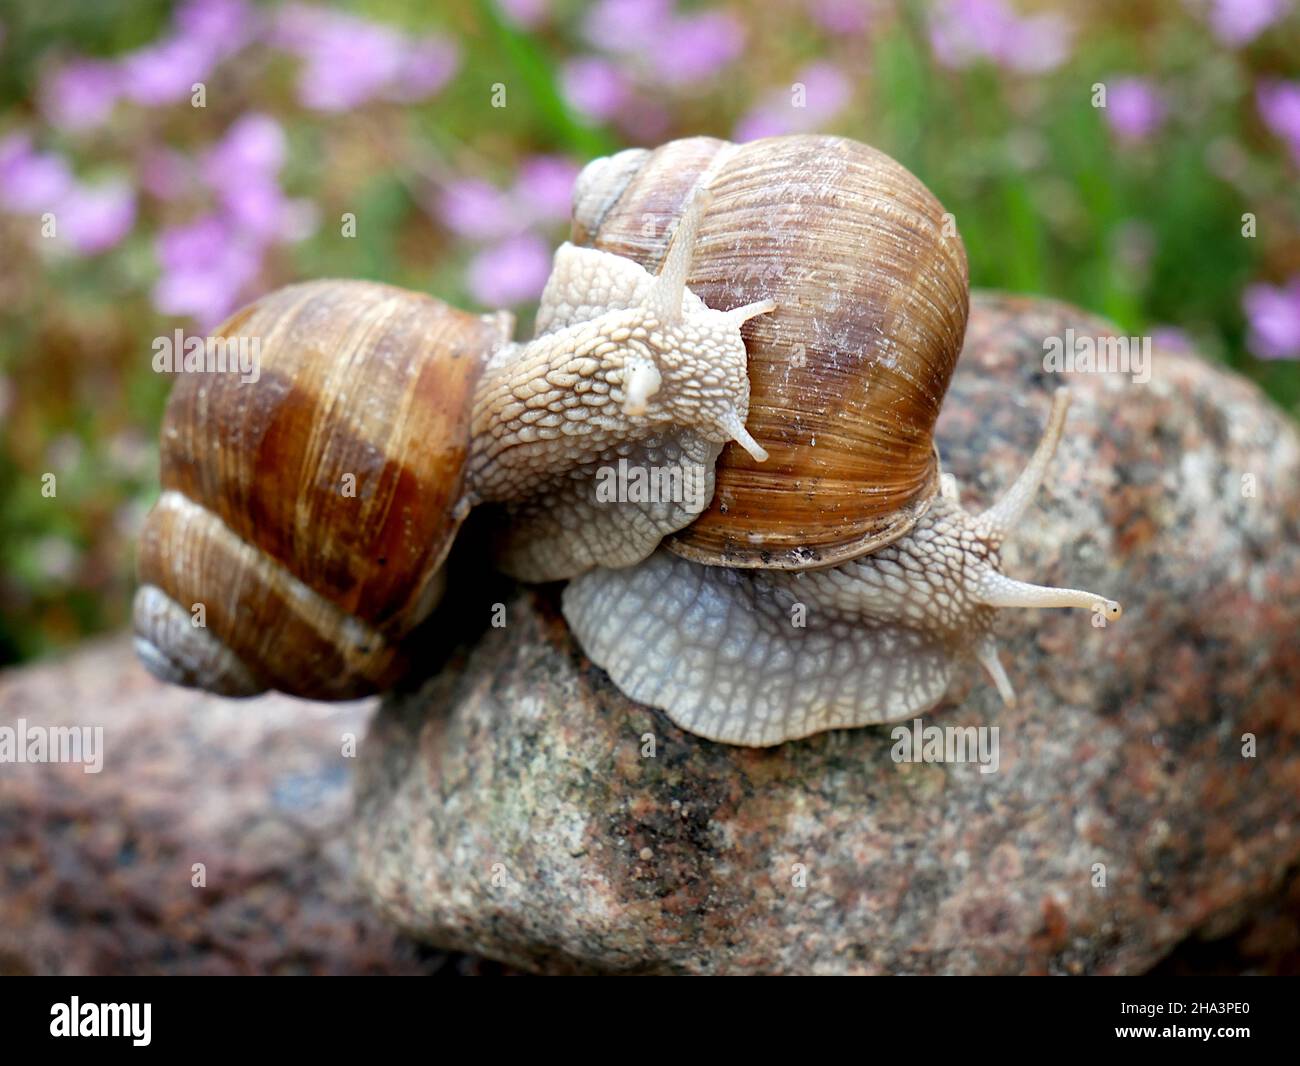 Helix pomatia also Roman snail, Burgundy snail, edible snail or escargot.Snail mucus (listed as SFF in ingredient labels) used for cosmetics that rege. Stock Photo